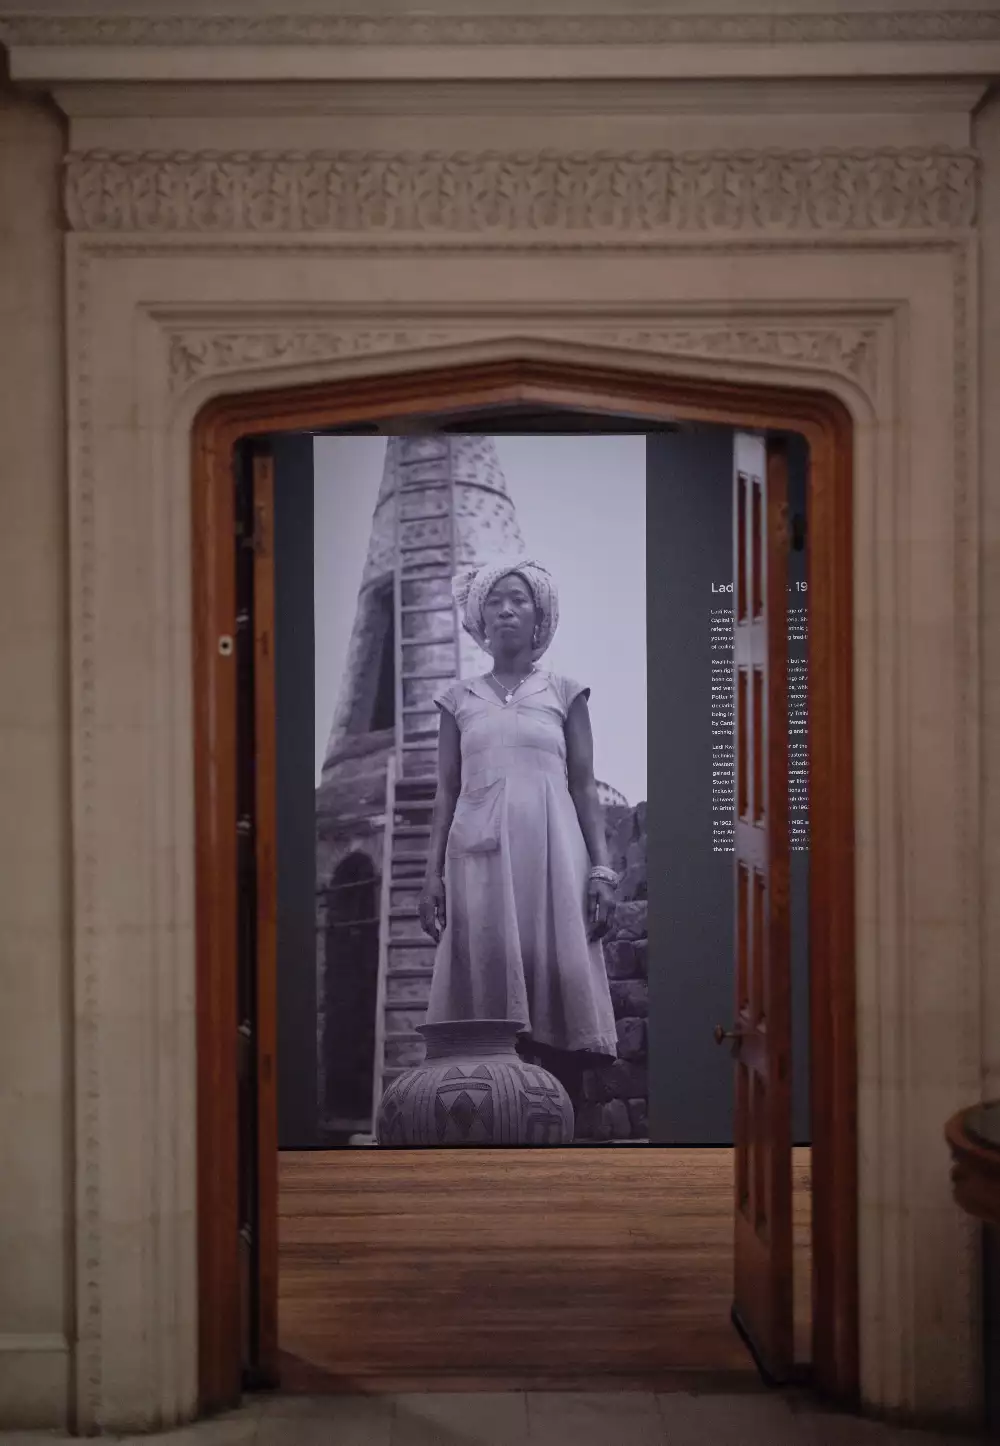 Archival photograph of Ladi Kwali, printed out large scale on the wall, framed by a doorway entrance to the room